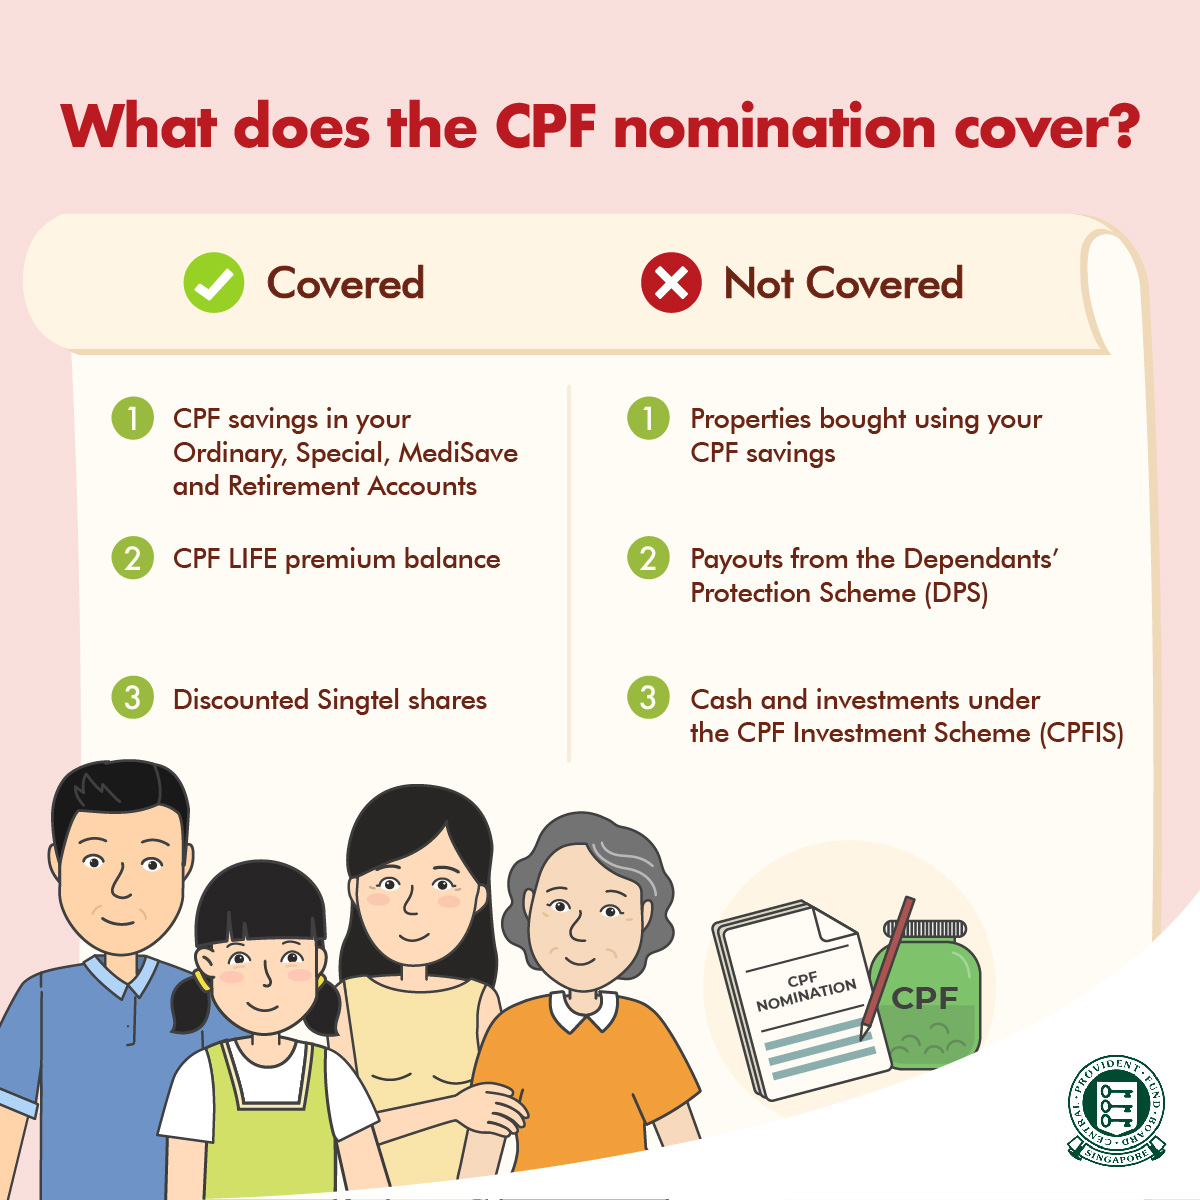 What does the CPF nomination cover